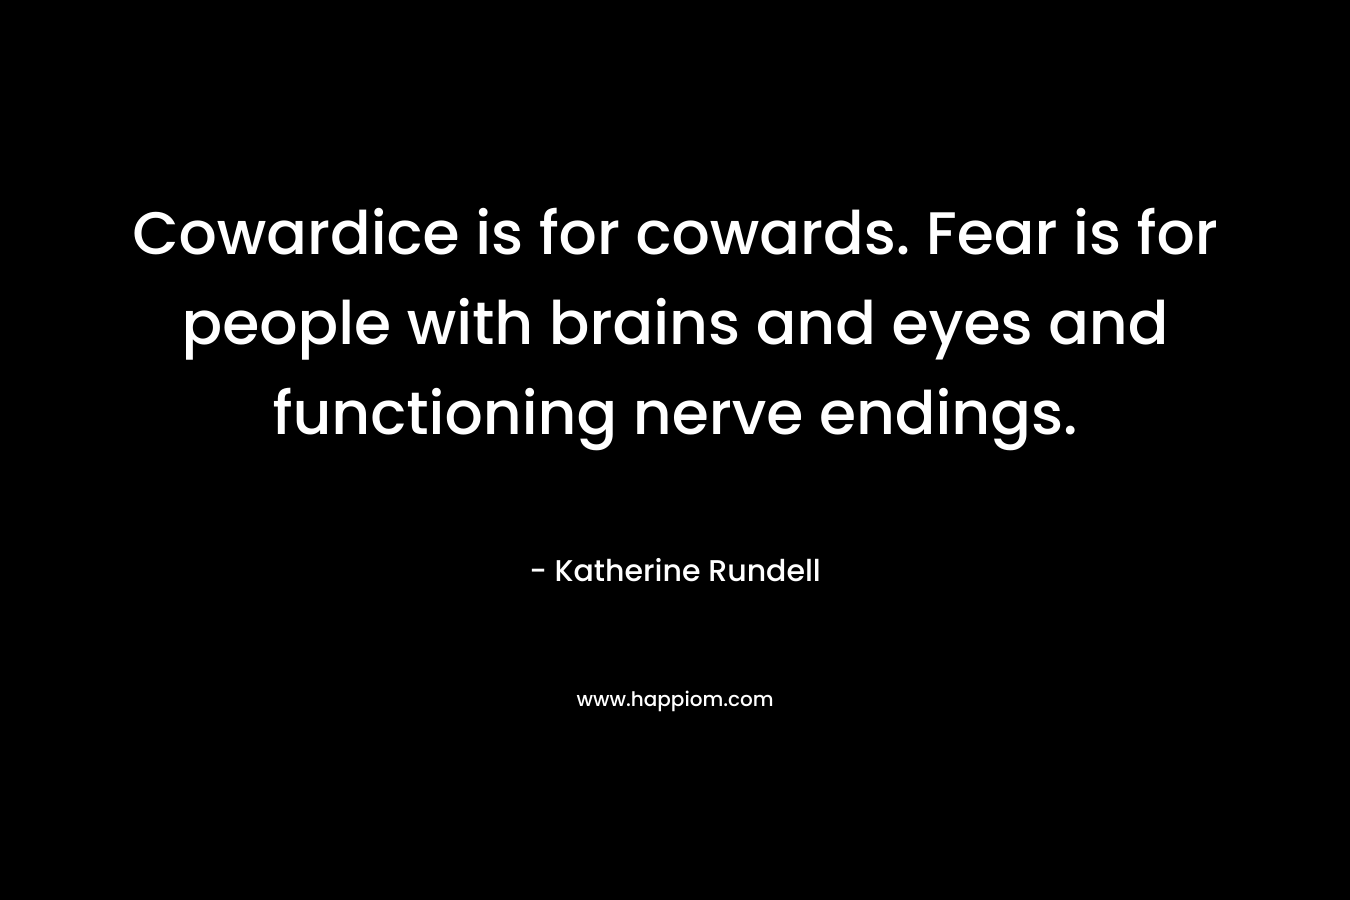 Cowardice is for cowards. Fear is for people with brains and eyes and functioning nerve endings. – Katherine Rundell